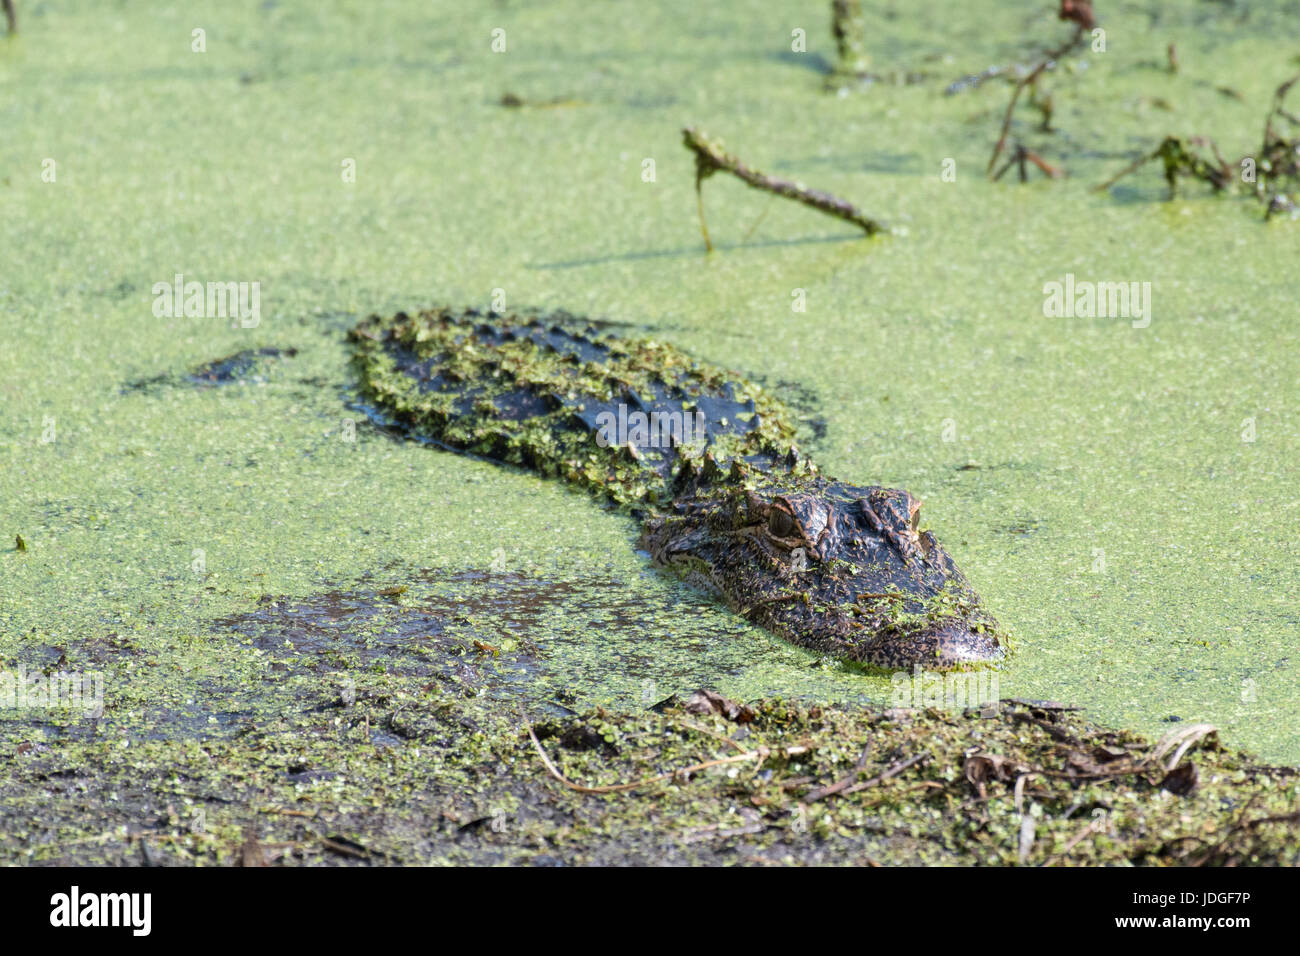 An American Alligator lies motionless in the duckweed of a Florida golf course water hazard. Alligators are ambush predators. Stock Photo